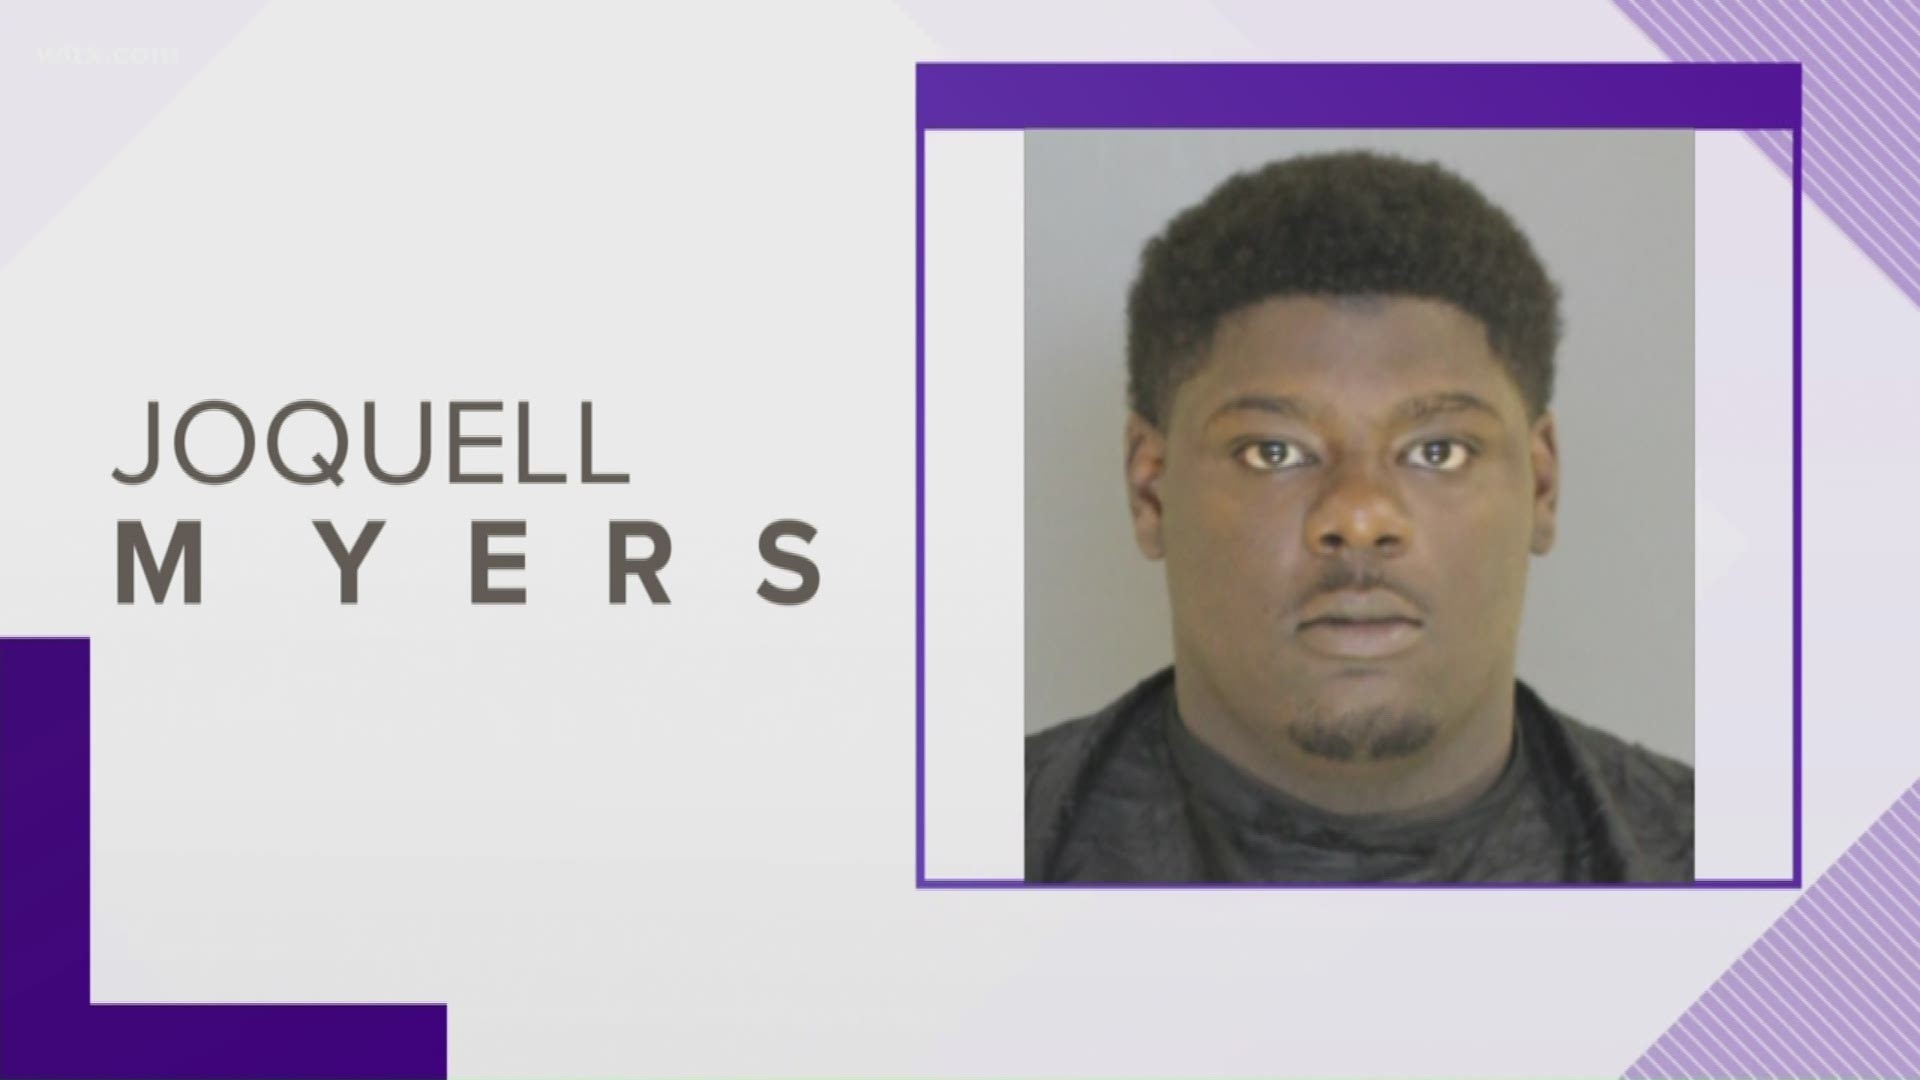 Second man faces murder charges after a shooting at the Sunoco gas station in Sumter earlier this month, hes 23-year old Joquell Myers